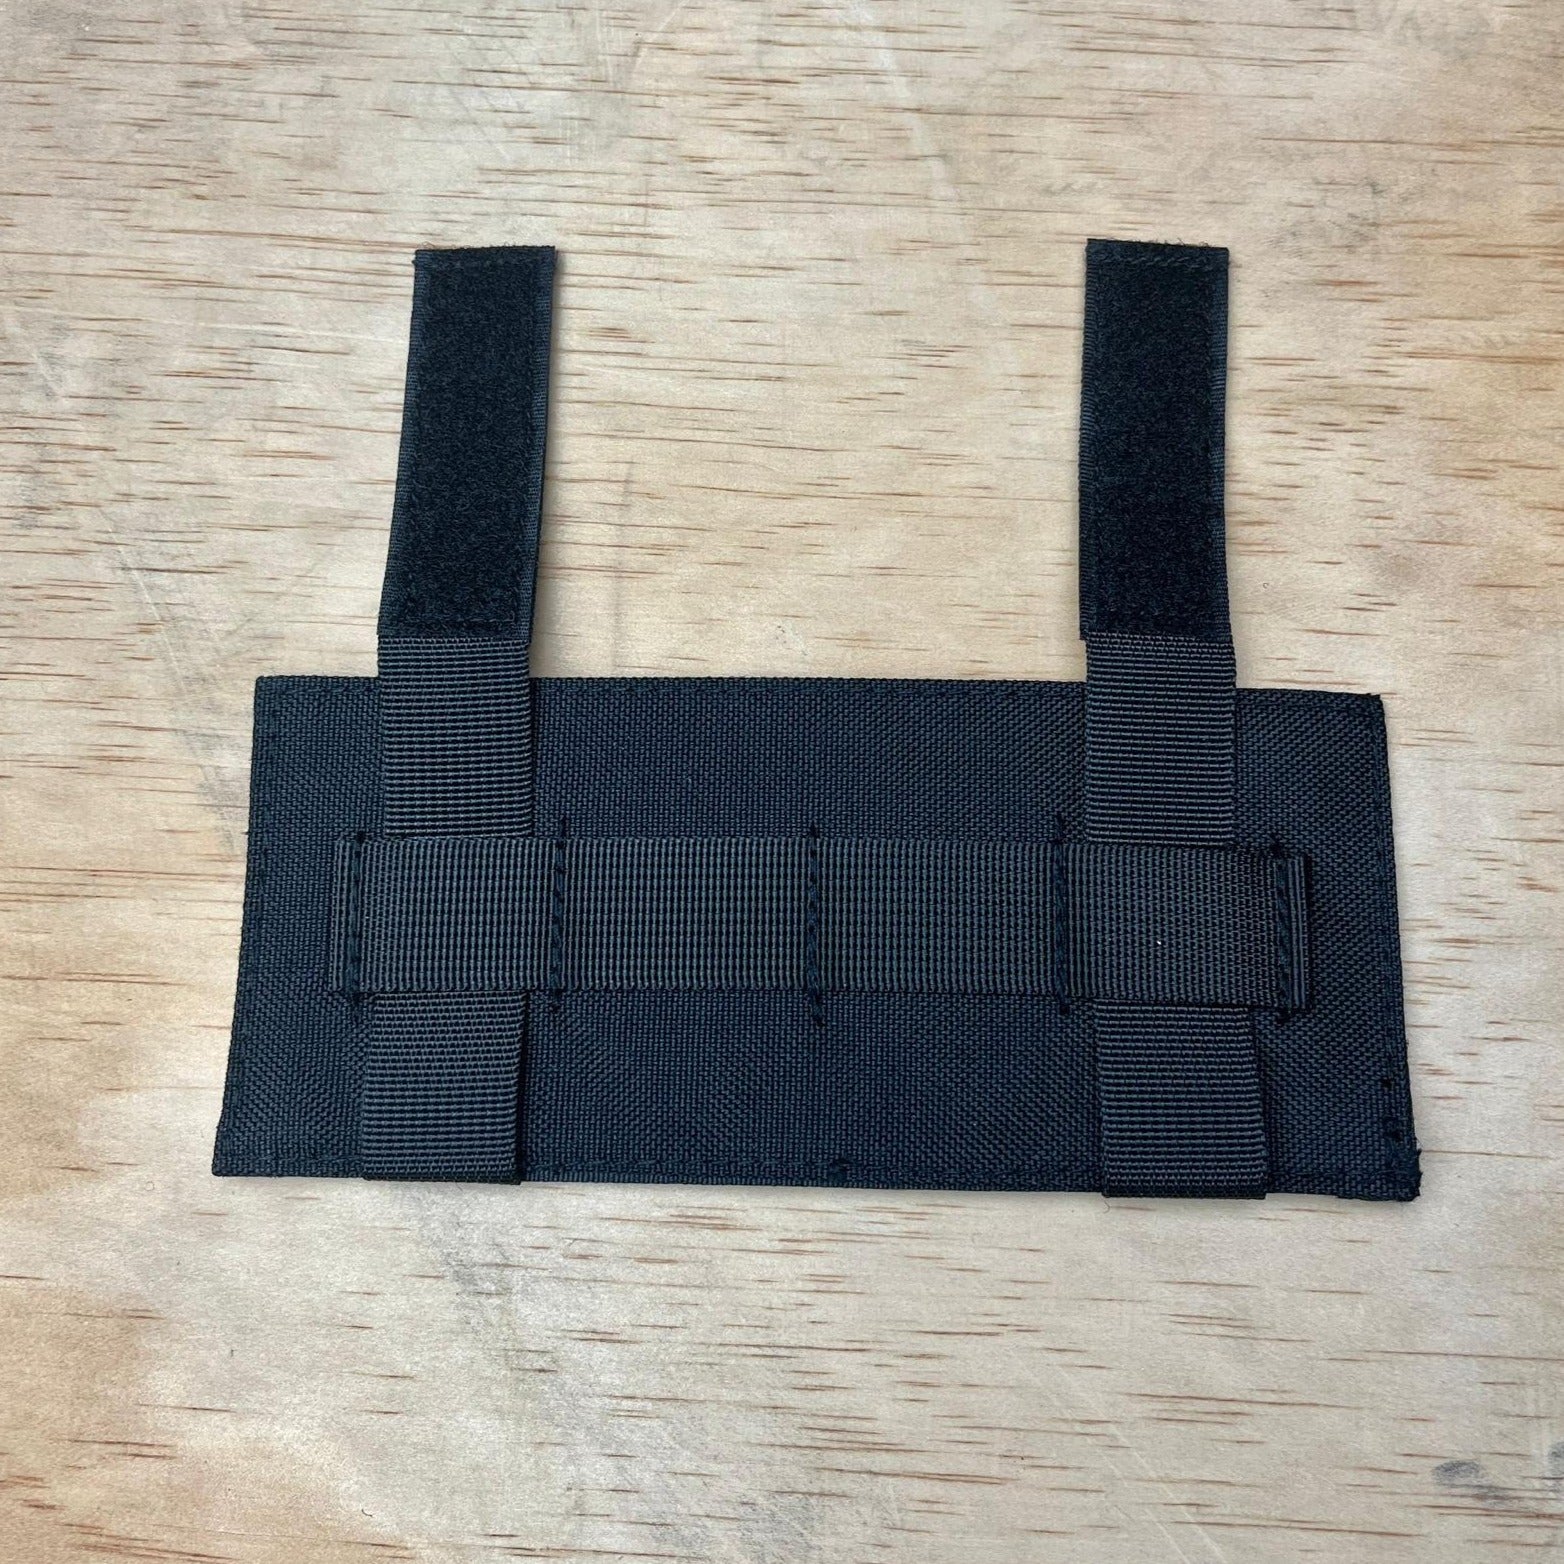 Rectangle patch holder